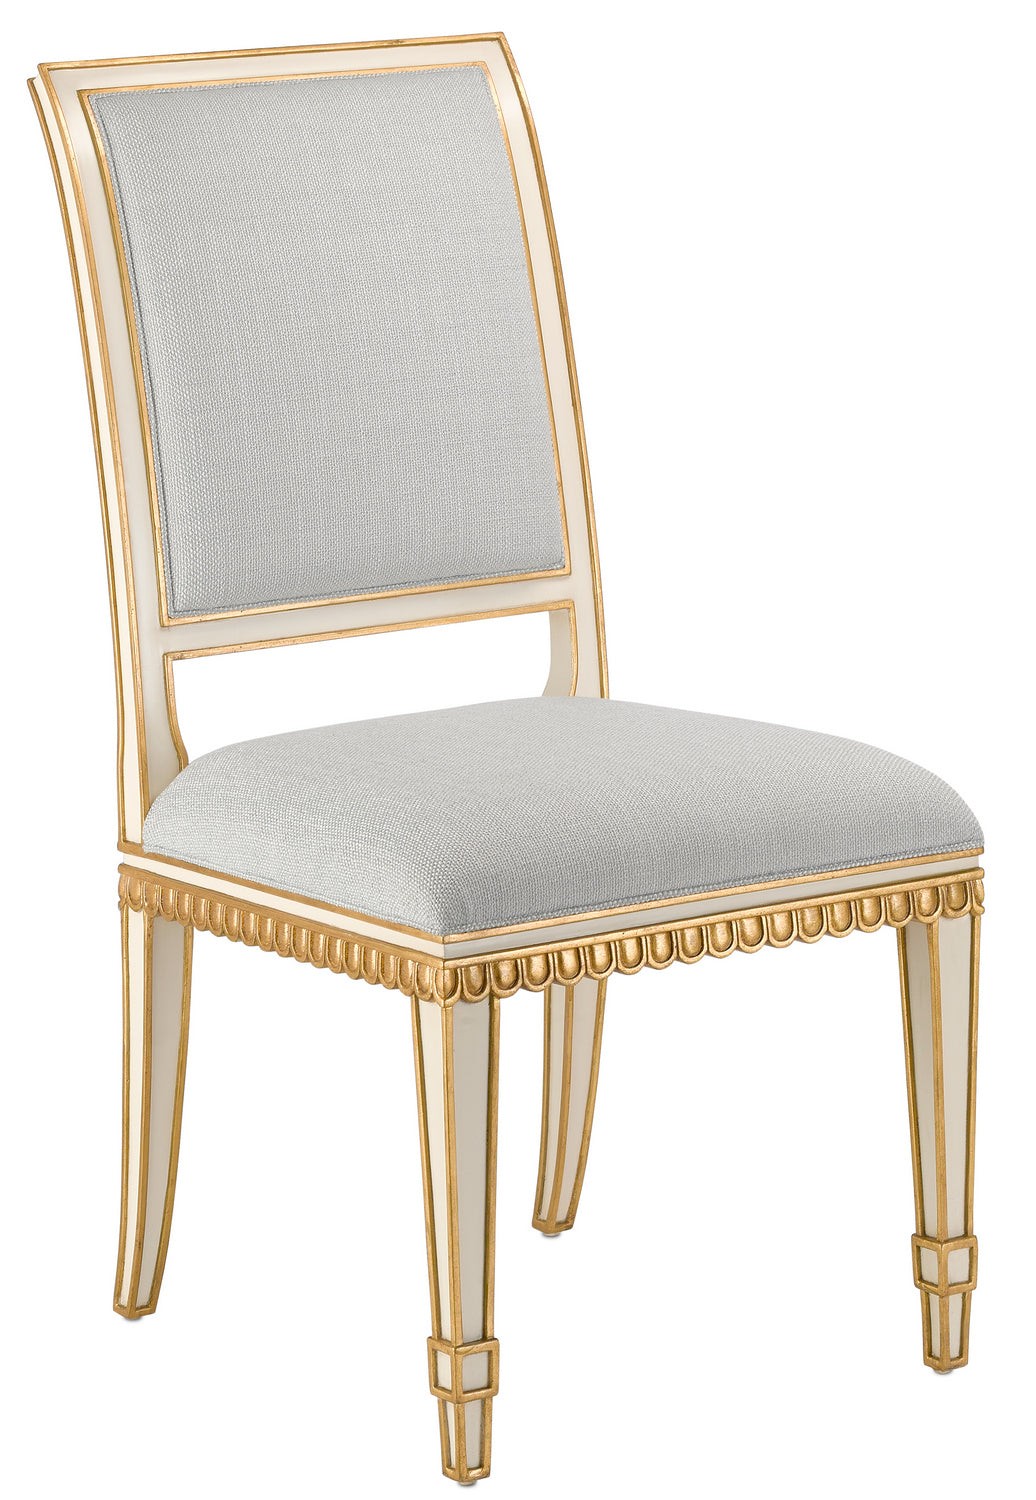 Chair from the Ines collection in Ivory/Antique Gold finish